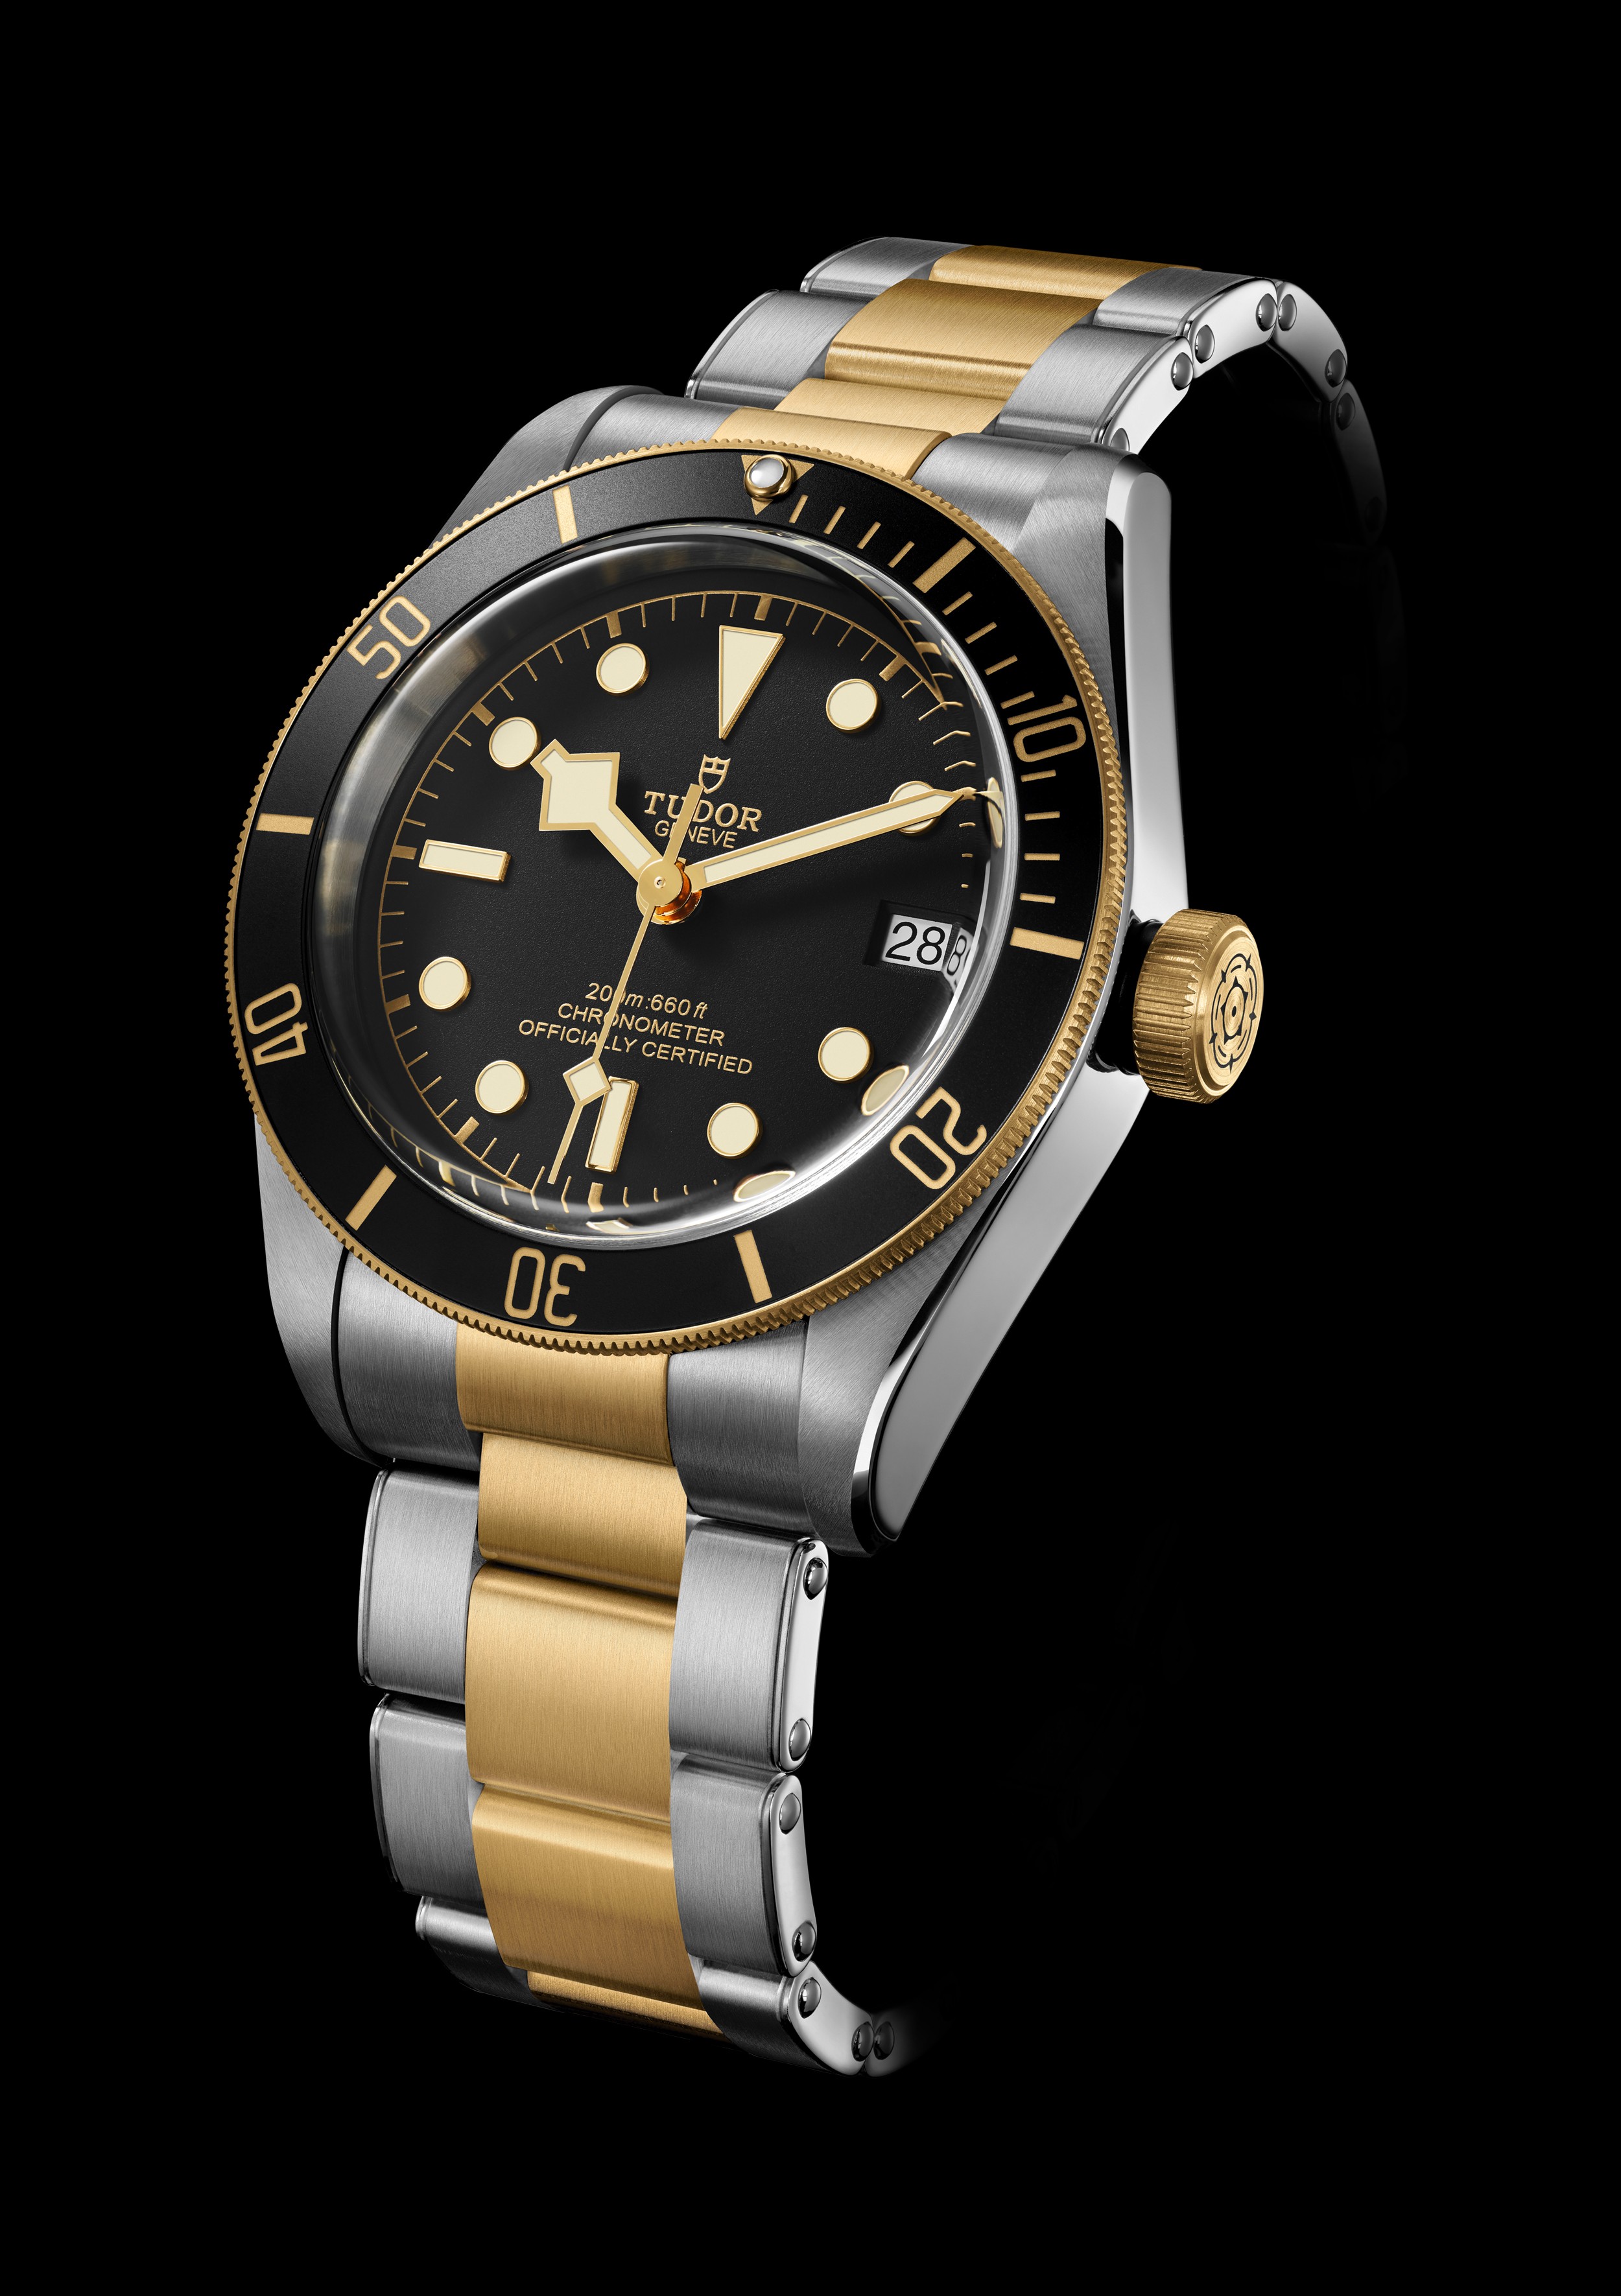 Heritage Black Bay dive watch in yellow gold and steel